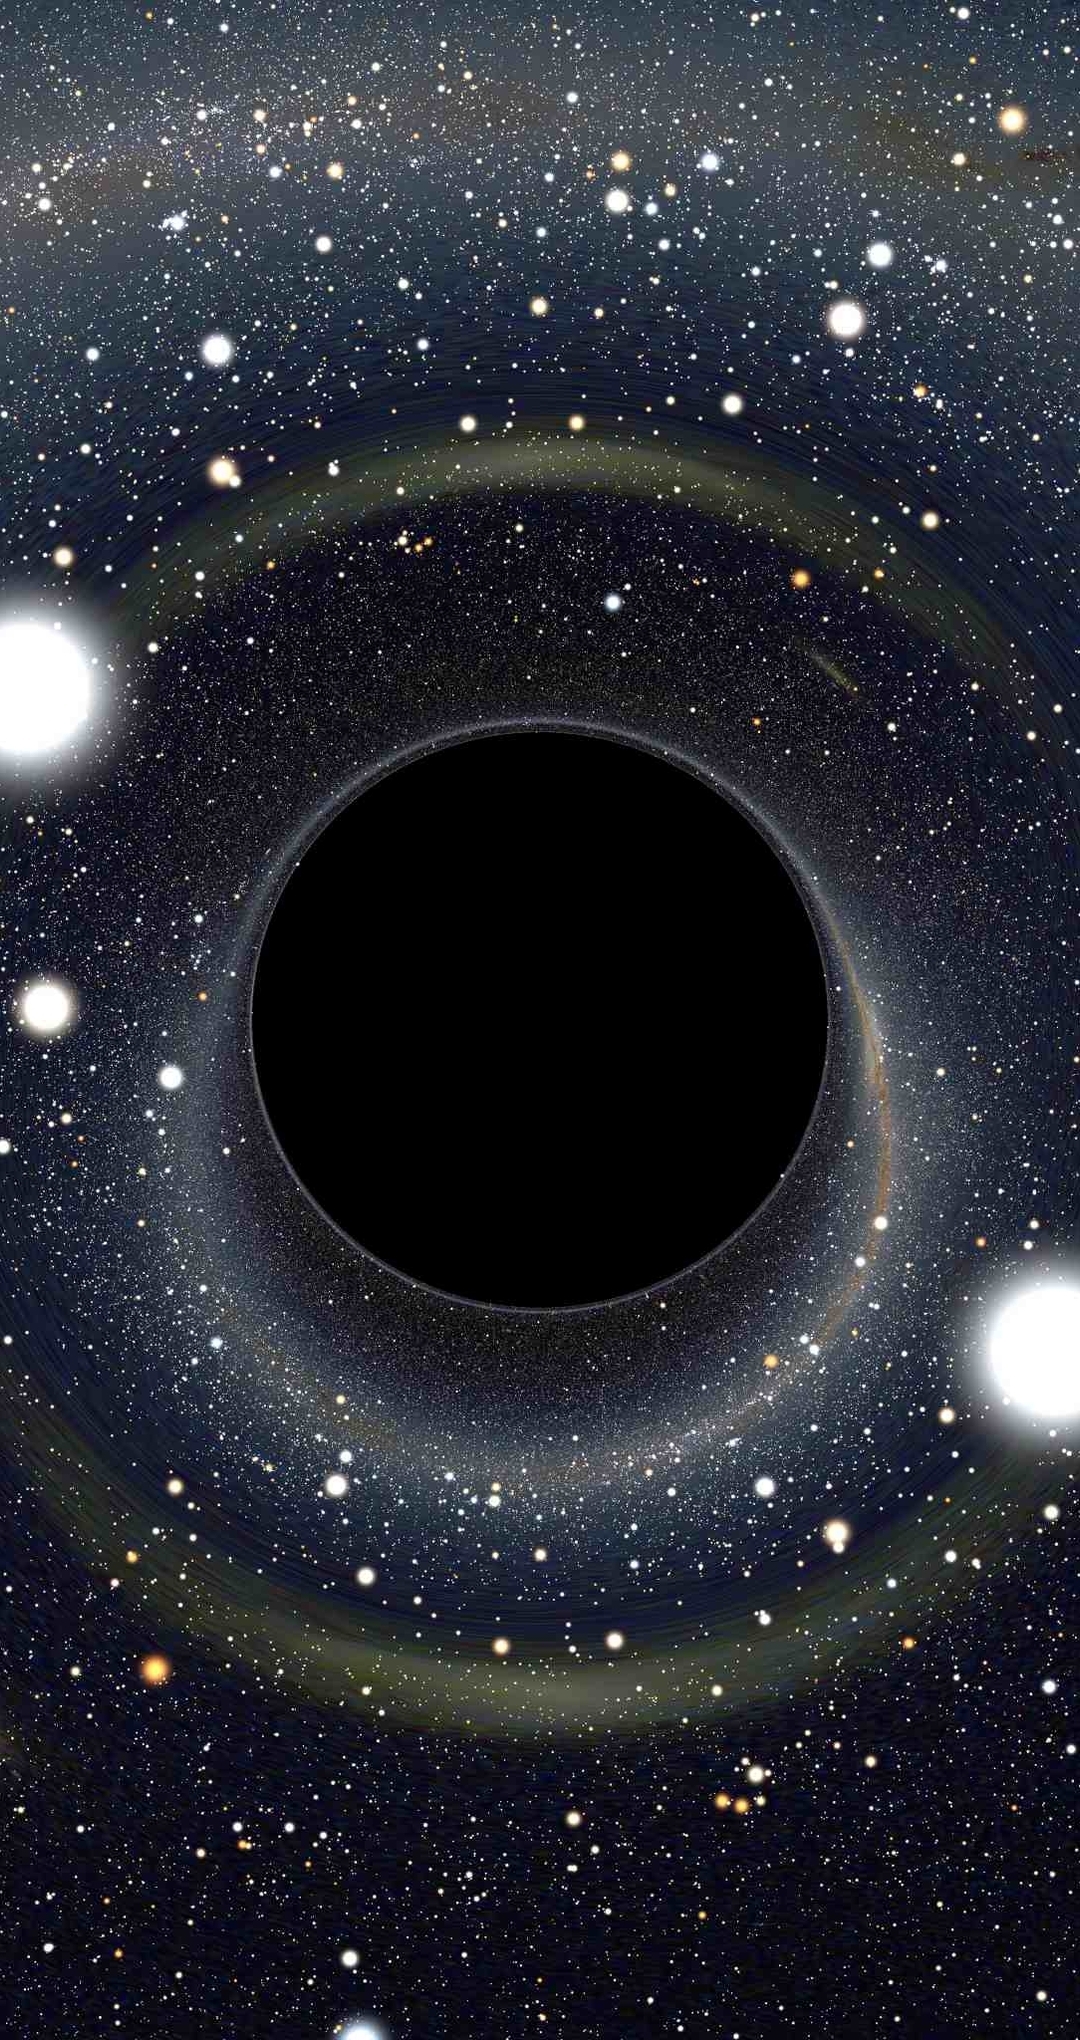 Image: Circle, light, stars, space, black hole, in the center